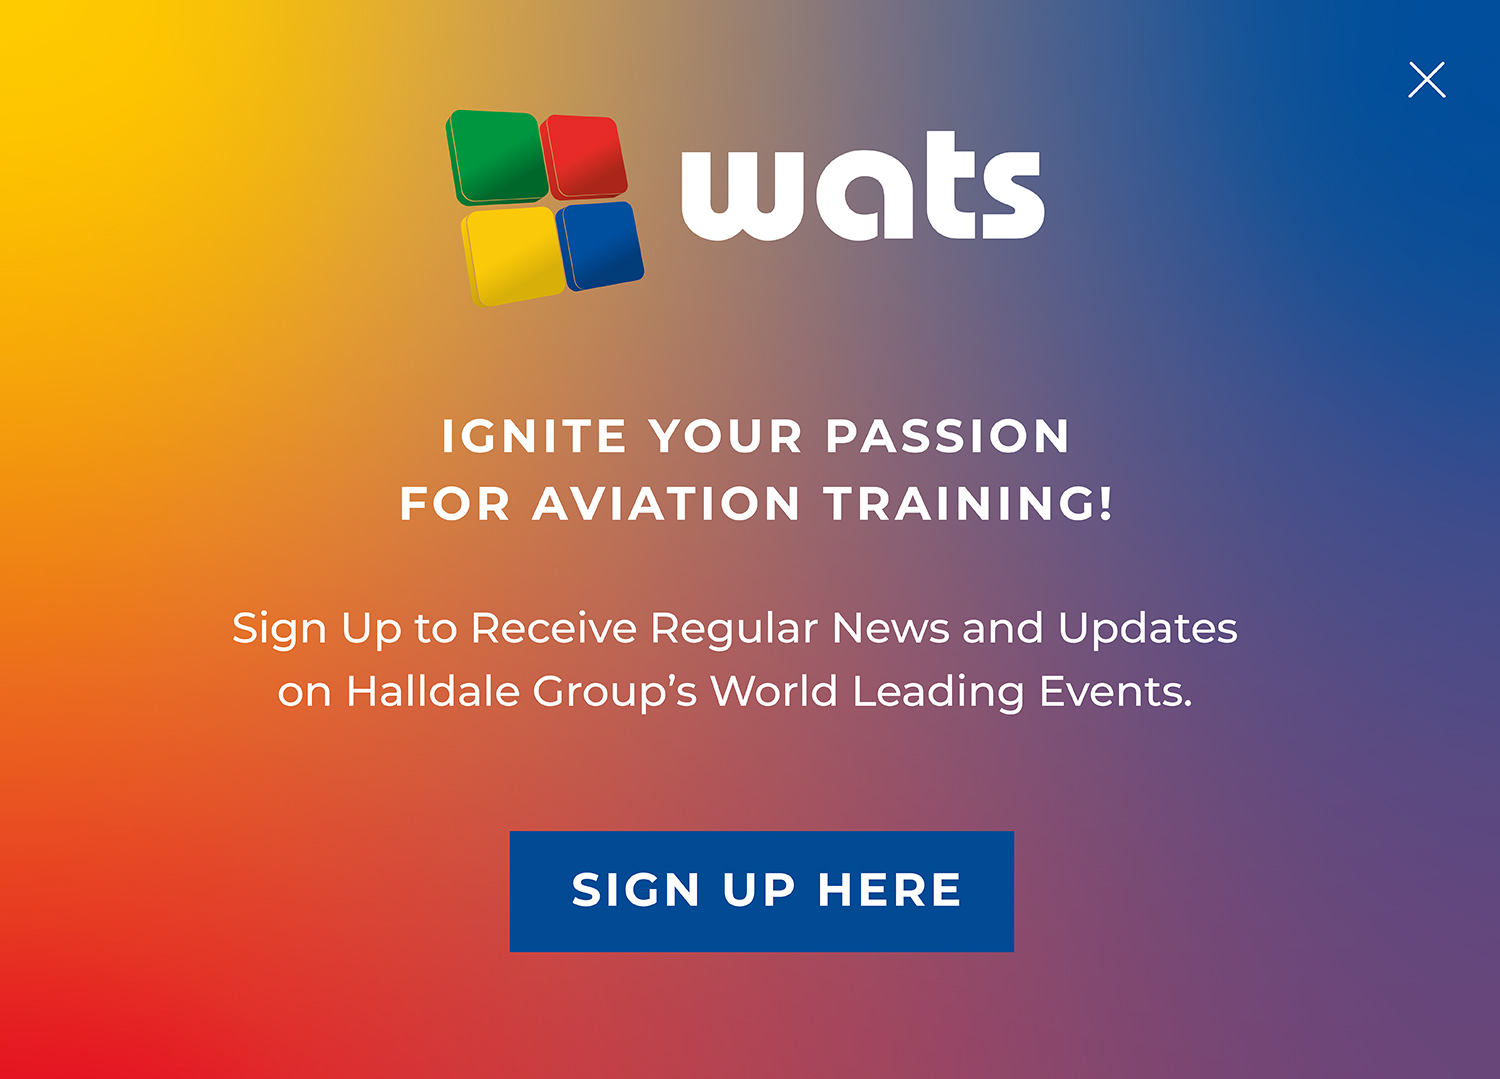 A sign up form for a world aviation training event